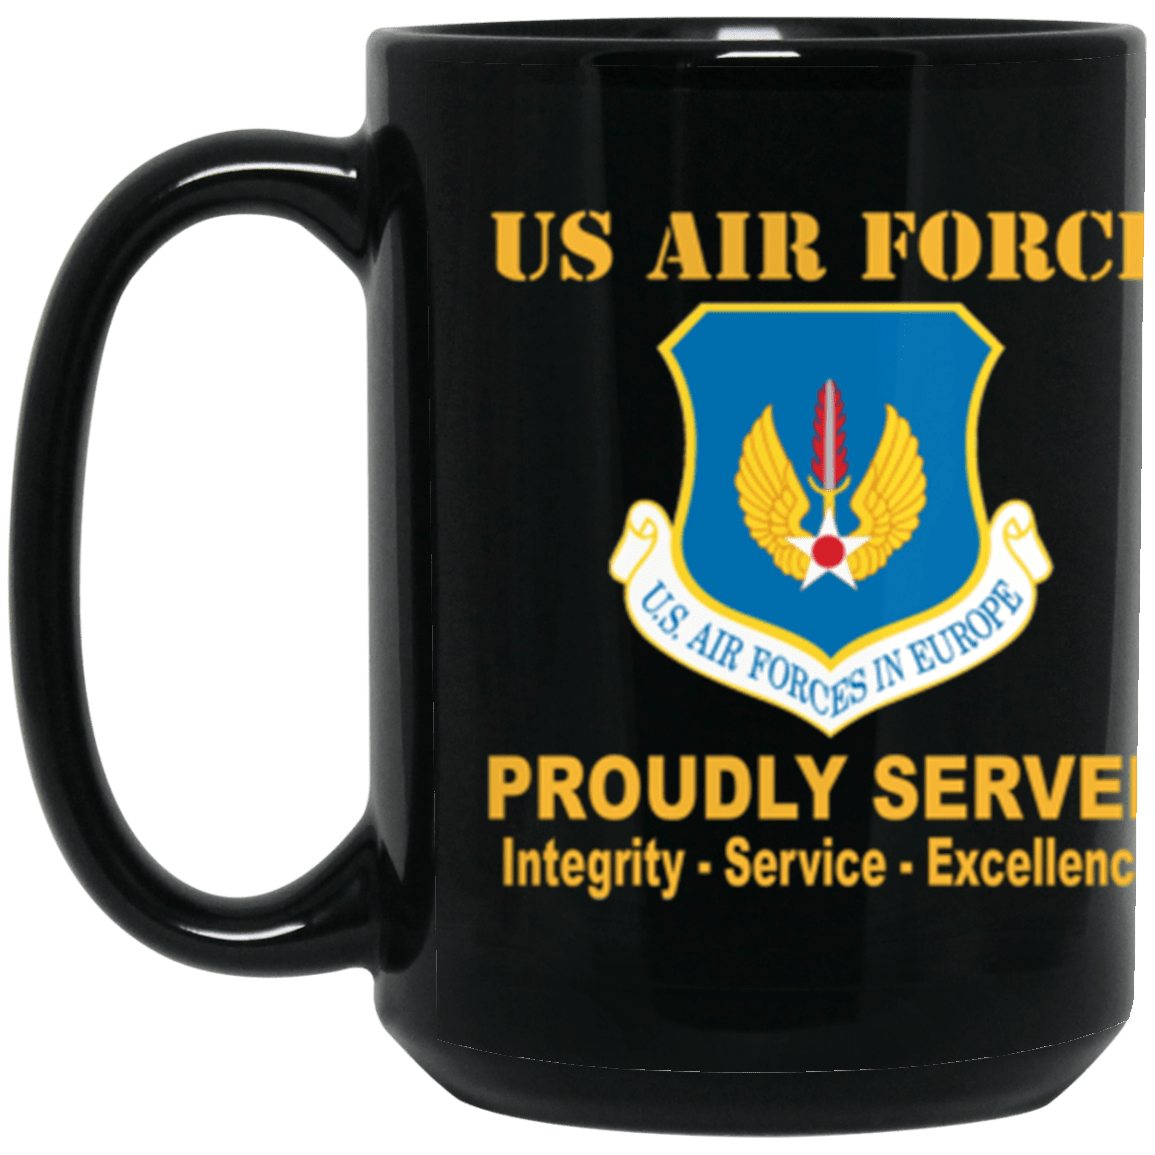 United States Air Forces in Europe Proudly Served Core Values 15 oz. Black Mug-Drinkware-Veterans Nation